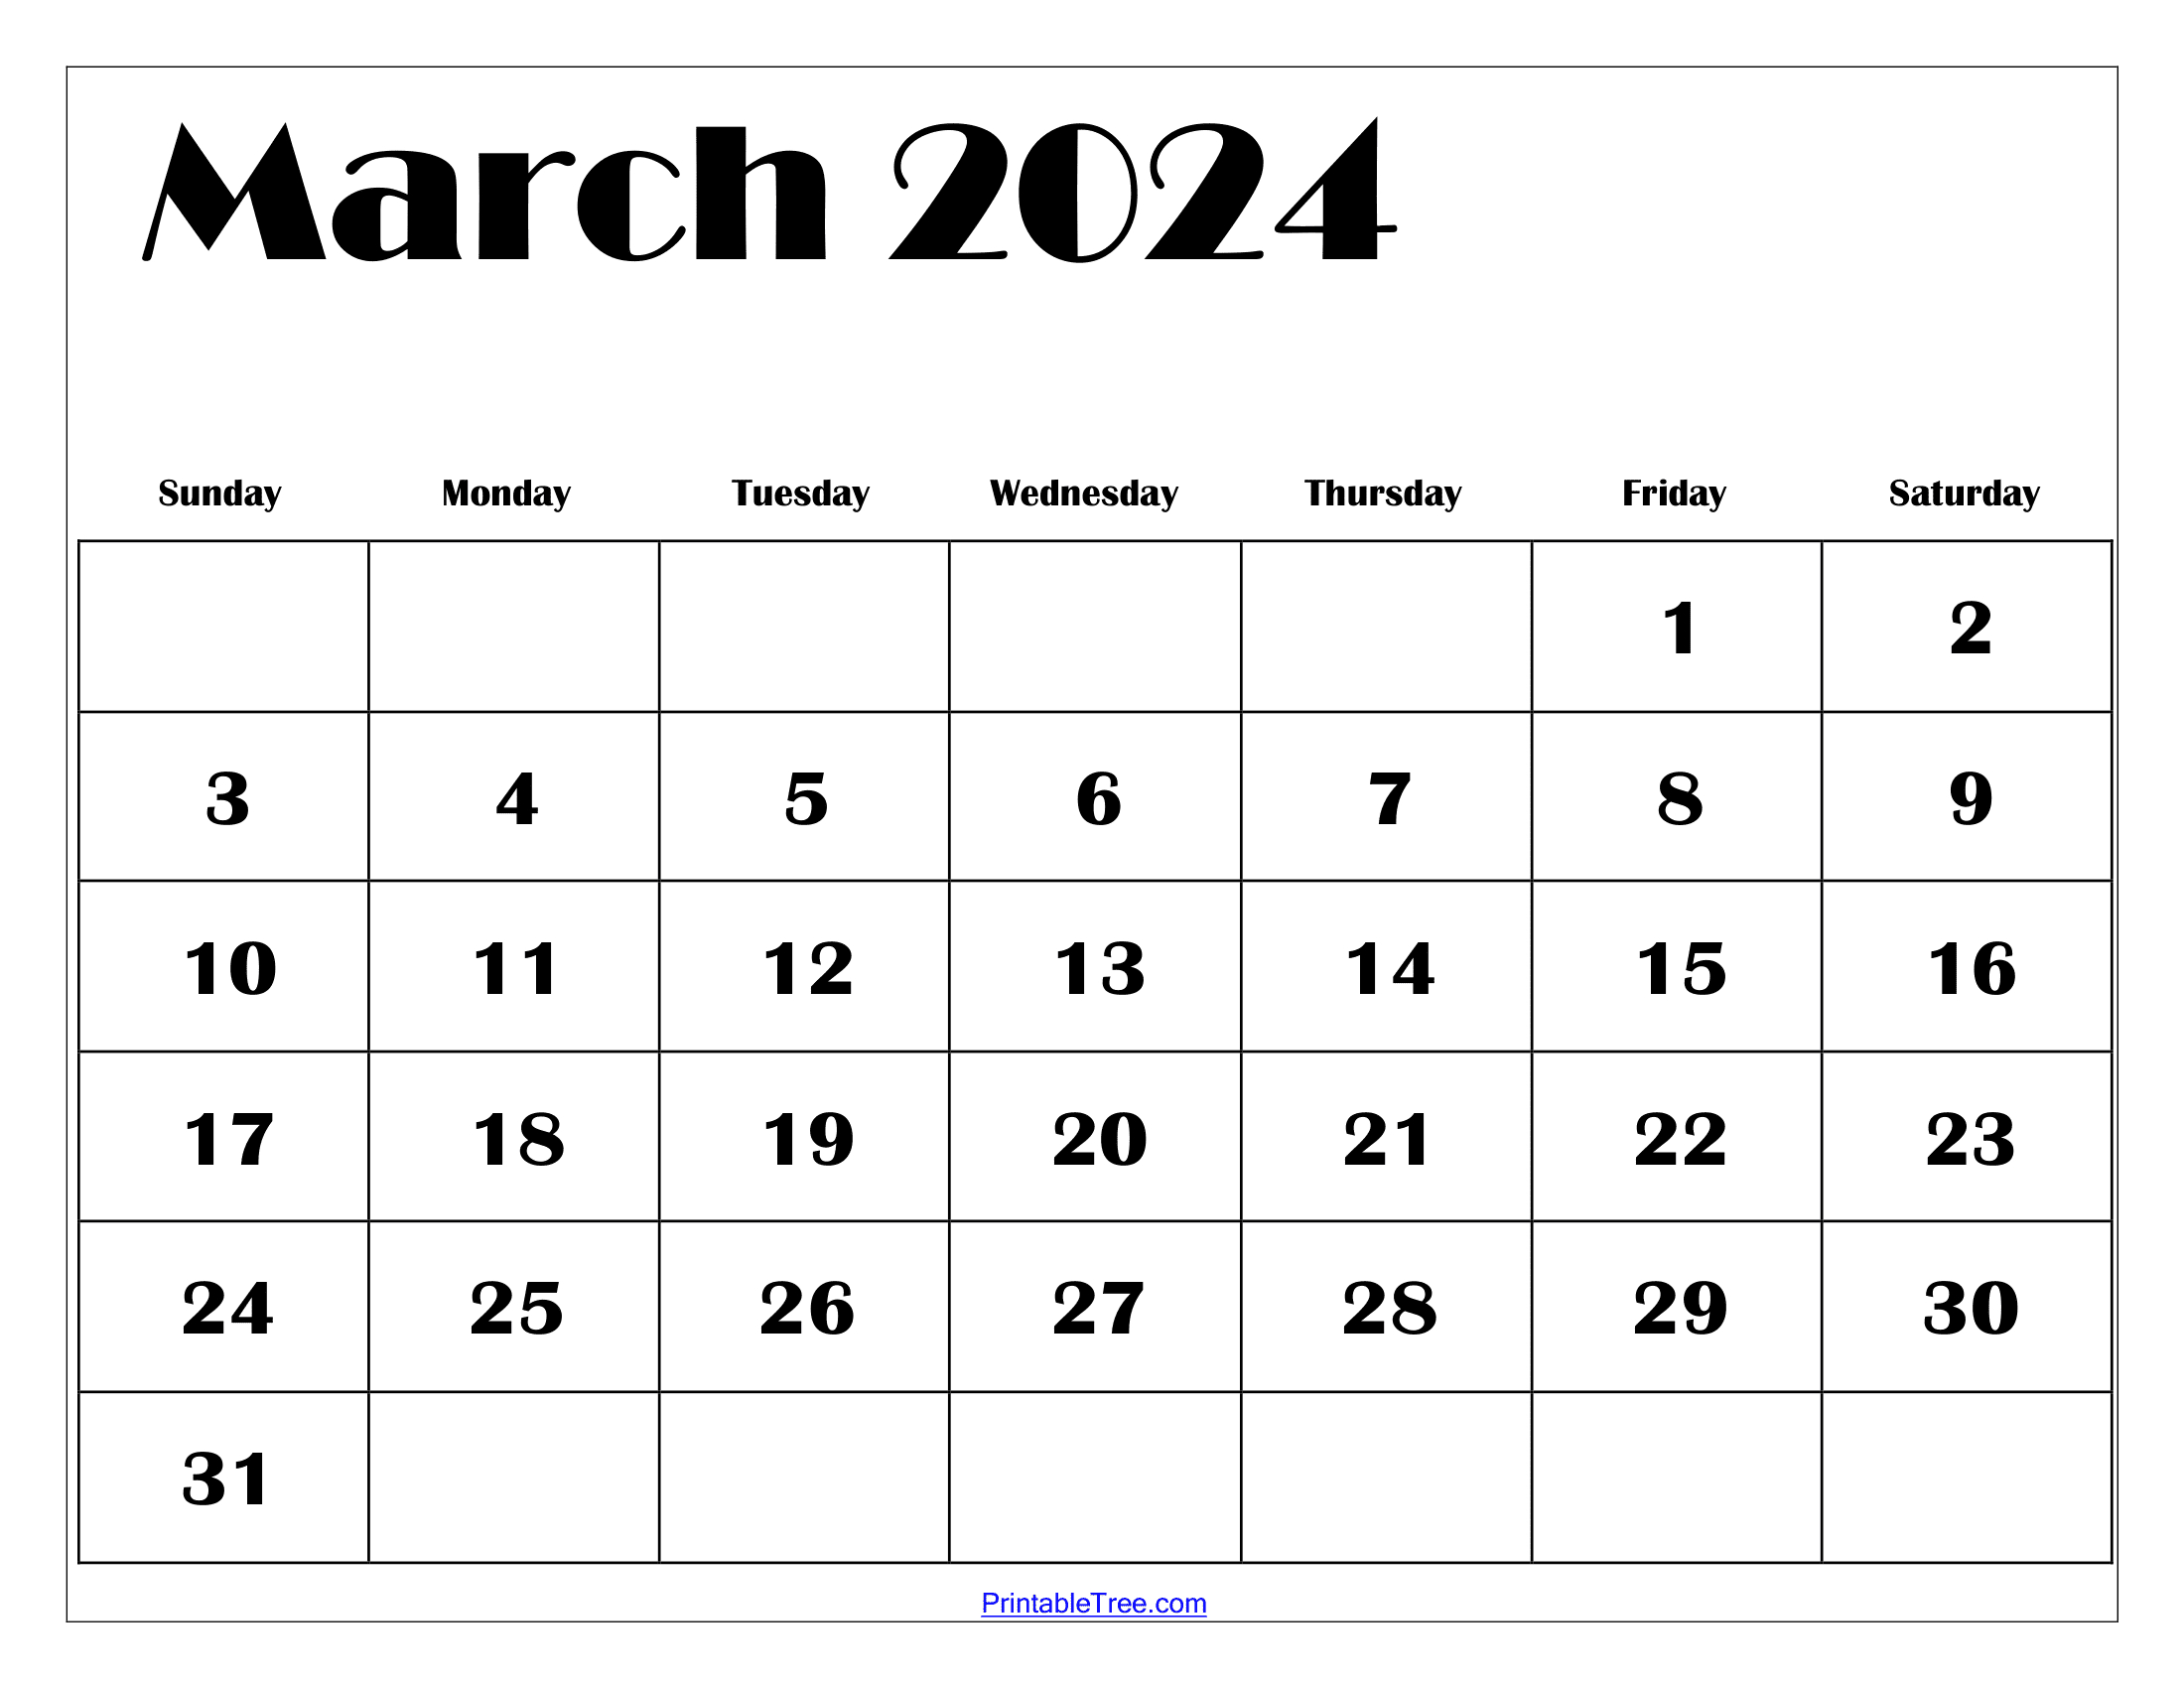 March 2024 Calendar Printable Pdf With Holidays Template Free | Calendar March 2024 Calendar Printable